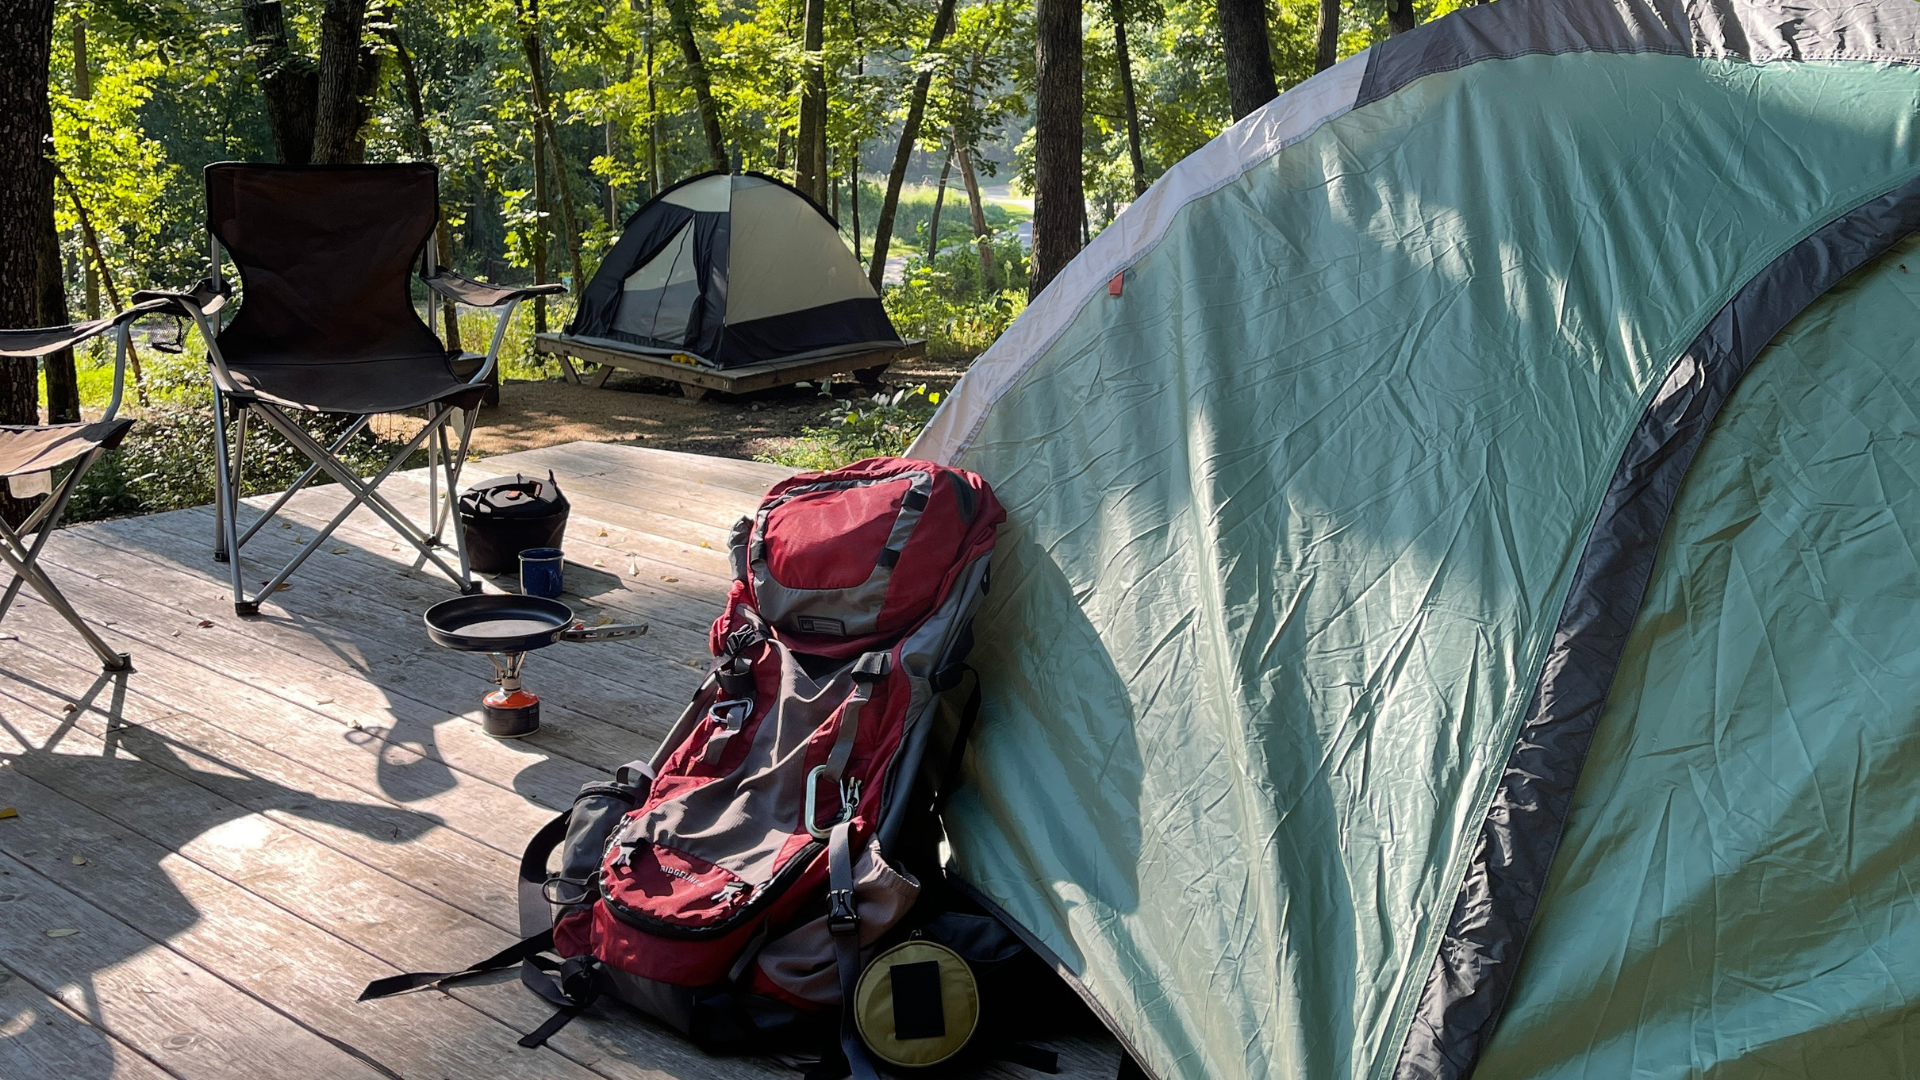 campsite with tent, backpack, and cooking gear